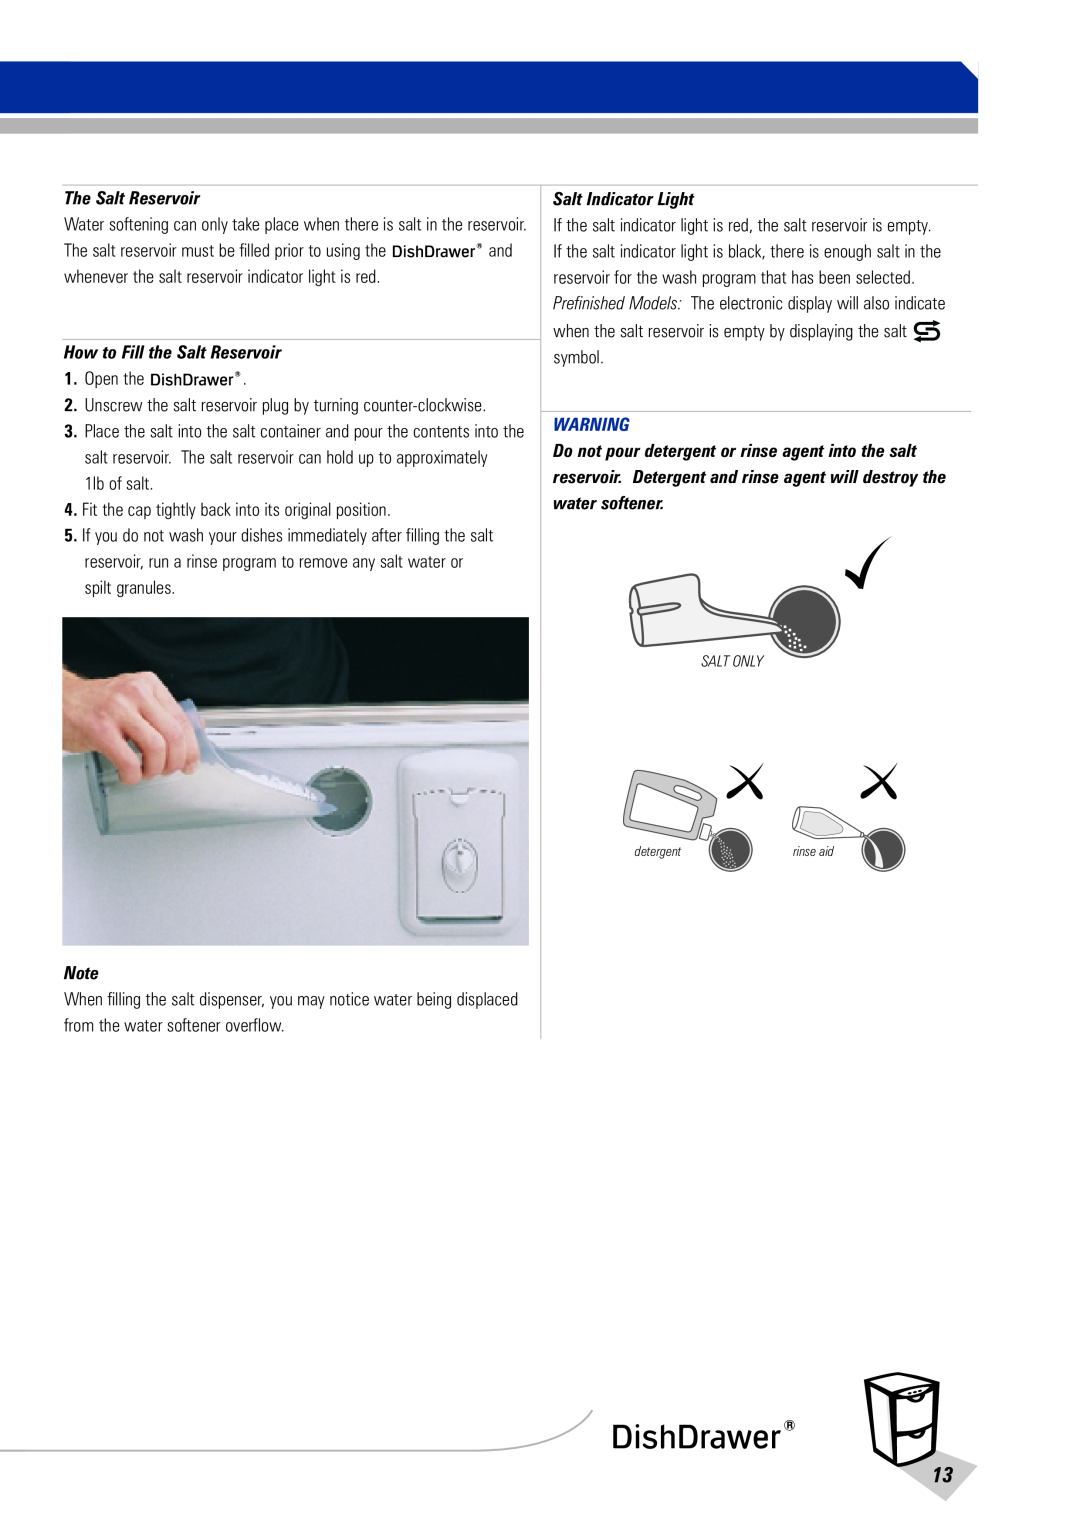 Fisher & Paykel DishDrawer manual The Salt Reservoir, How to Fill the Salt Reservoir, Salt Indicator Light, Open the 